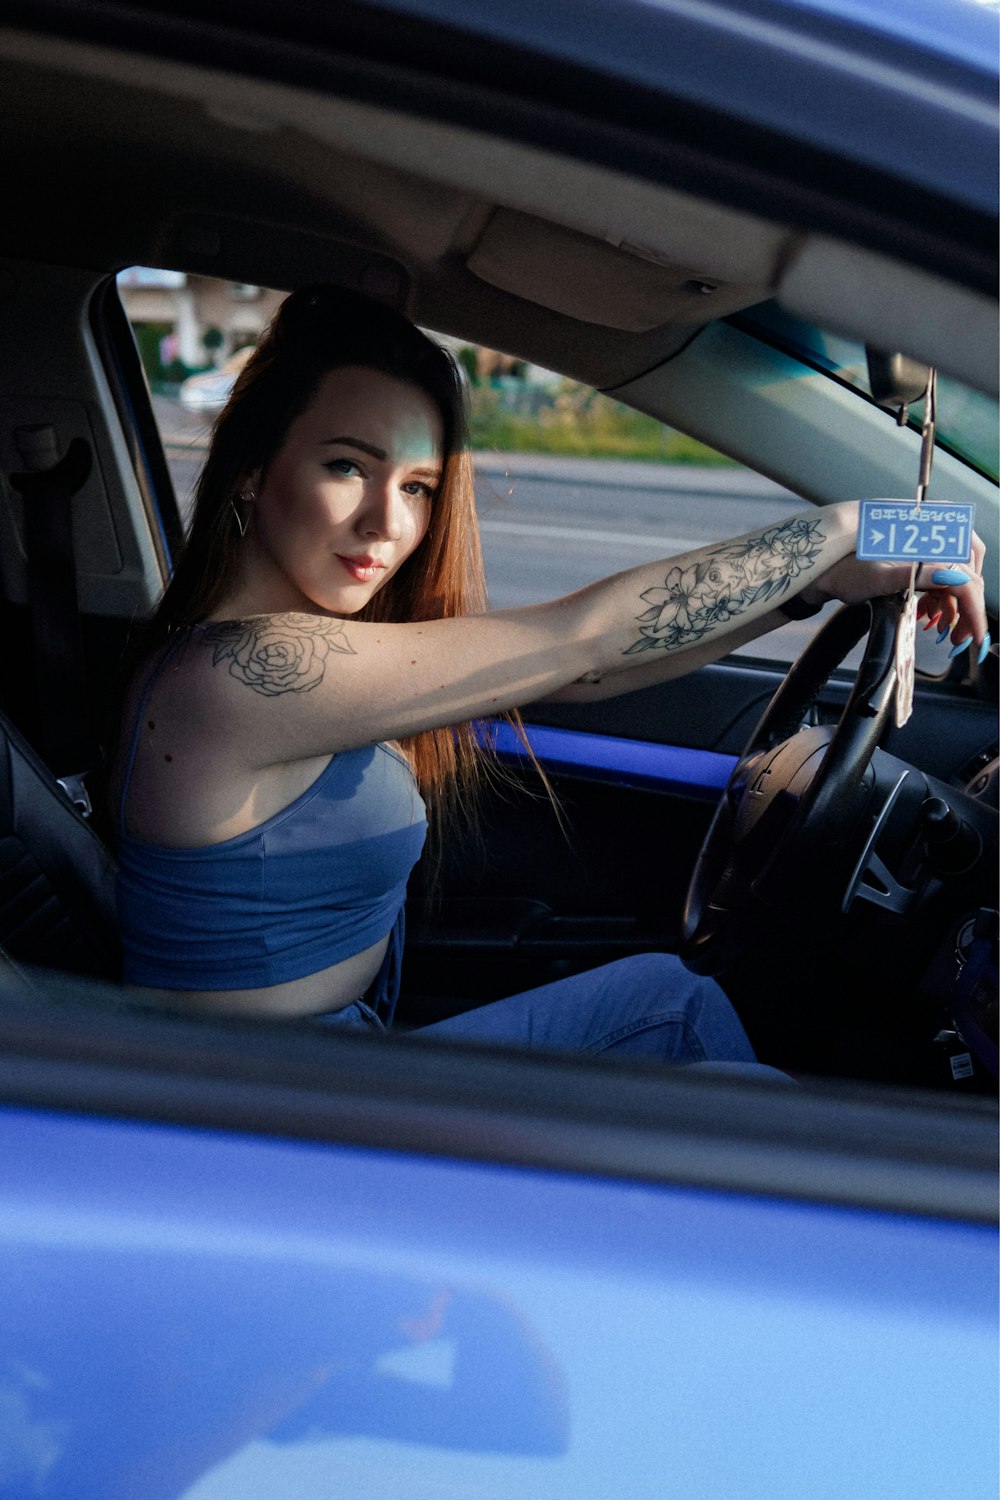 woman in blue tank top and blue denim jeans sitting on car seat